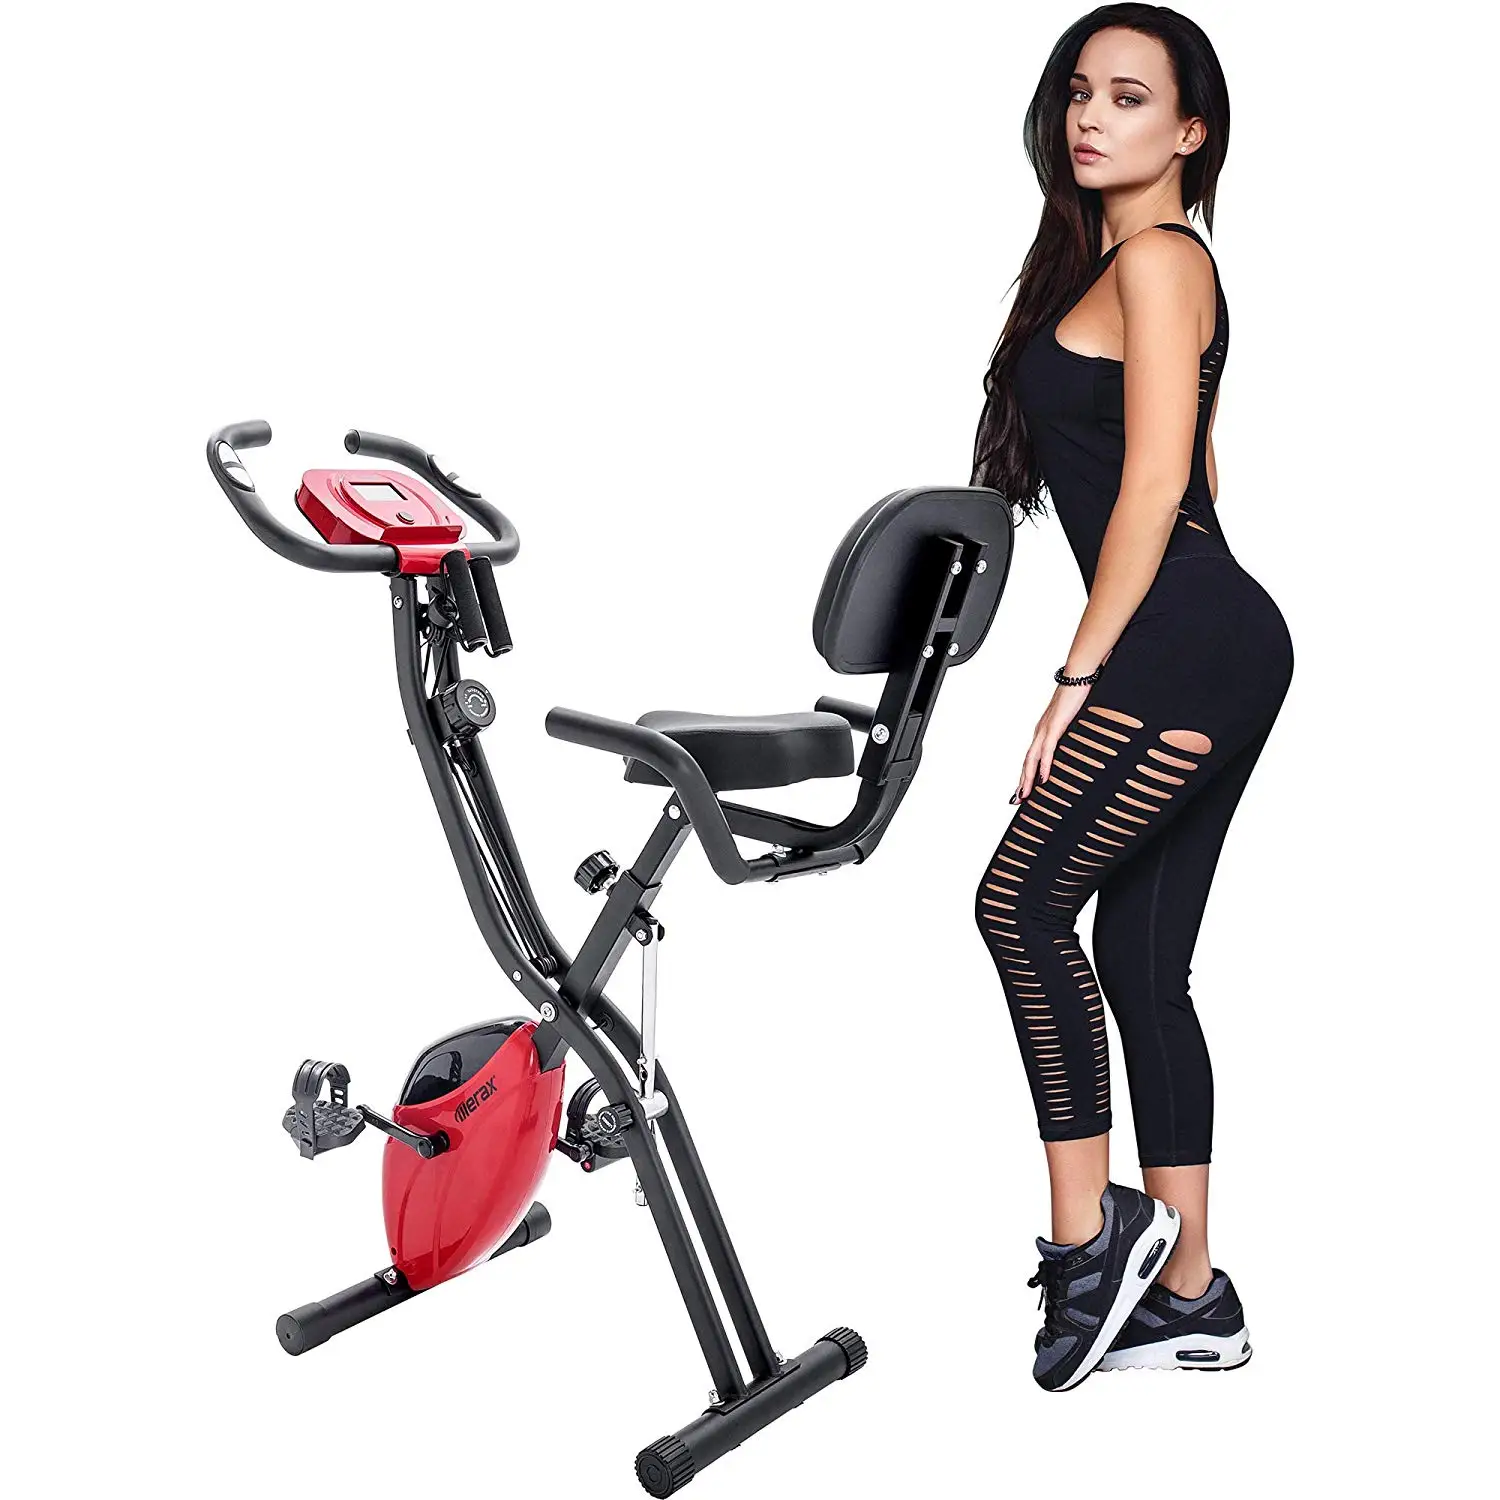 

Gym Equipment Fitness Machine Spin Bike Exercise Folding Indoor Body Building Home Magnetic Static Bicycle Sports Green Unisex